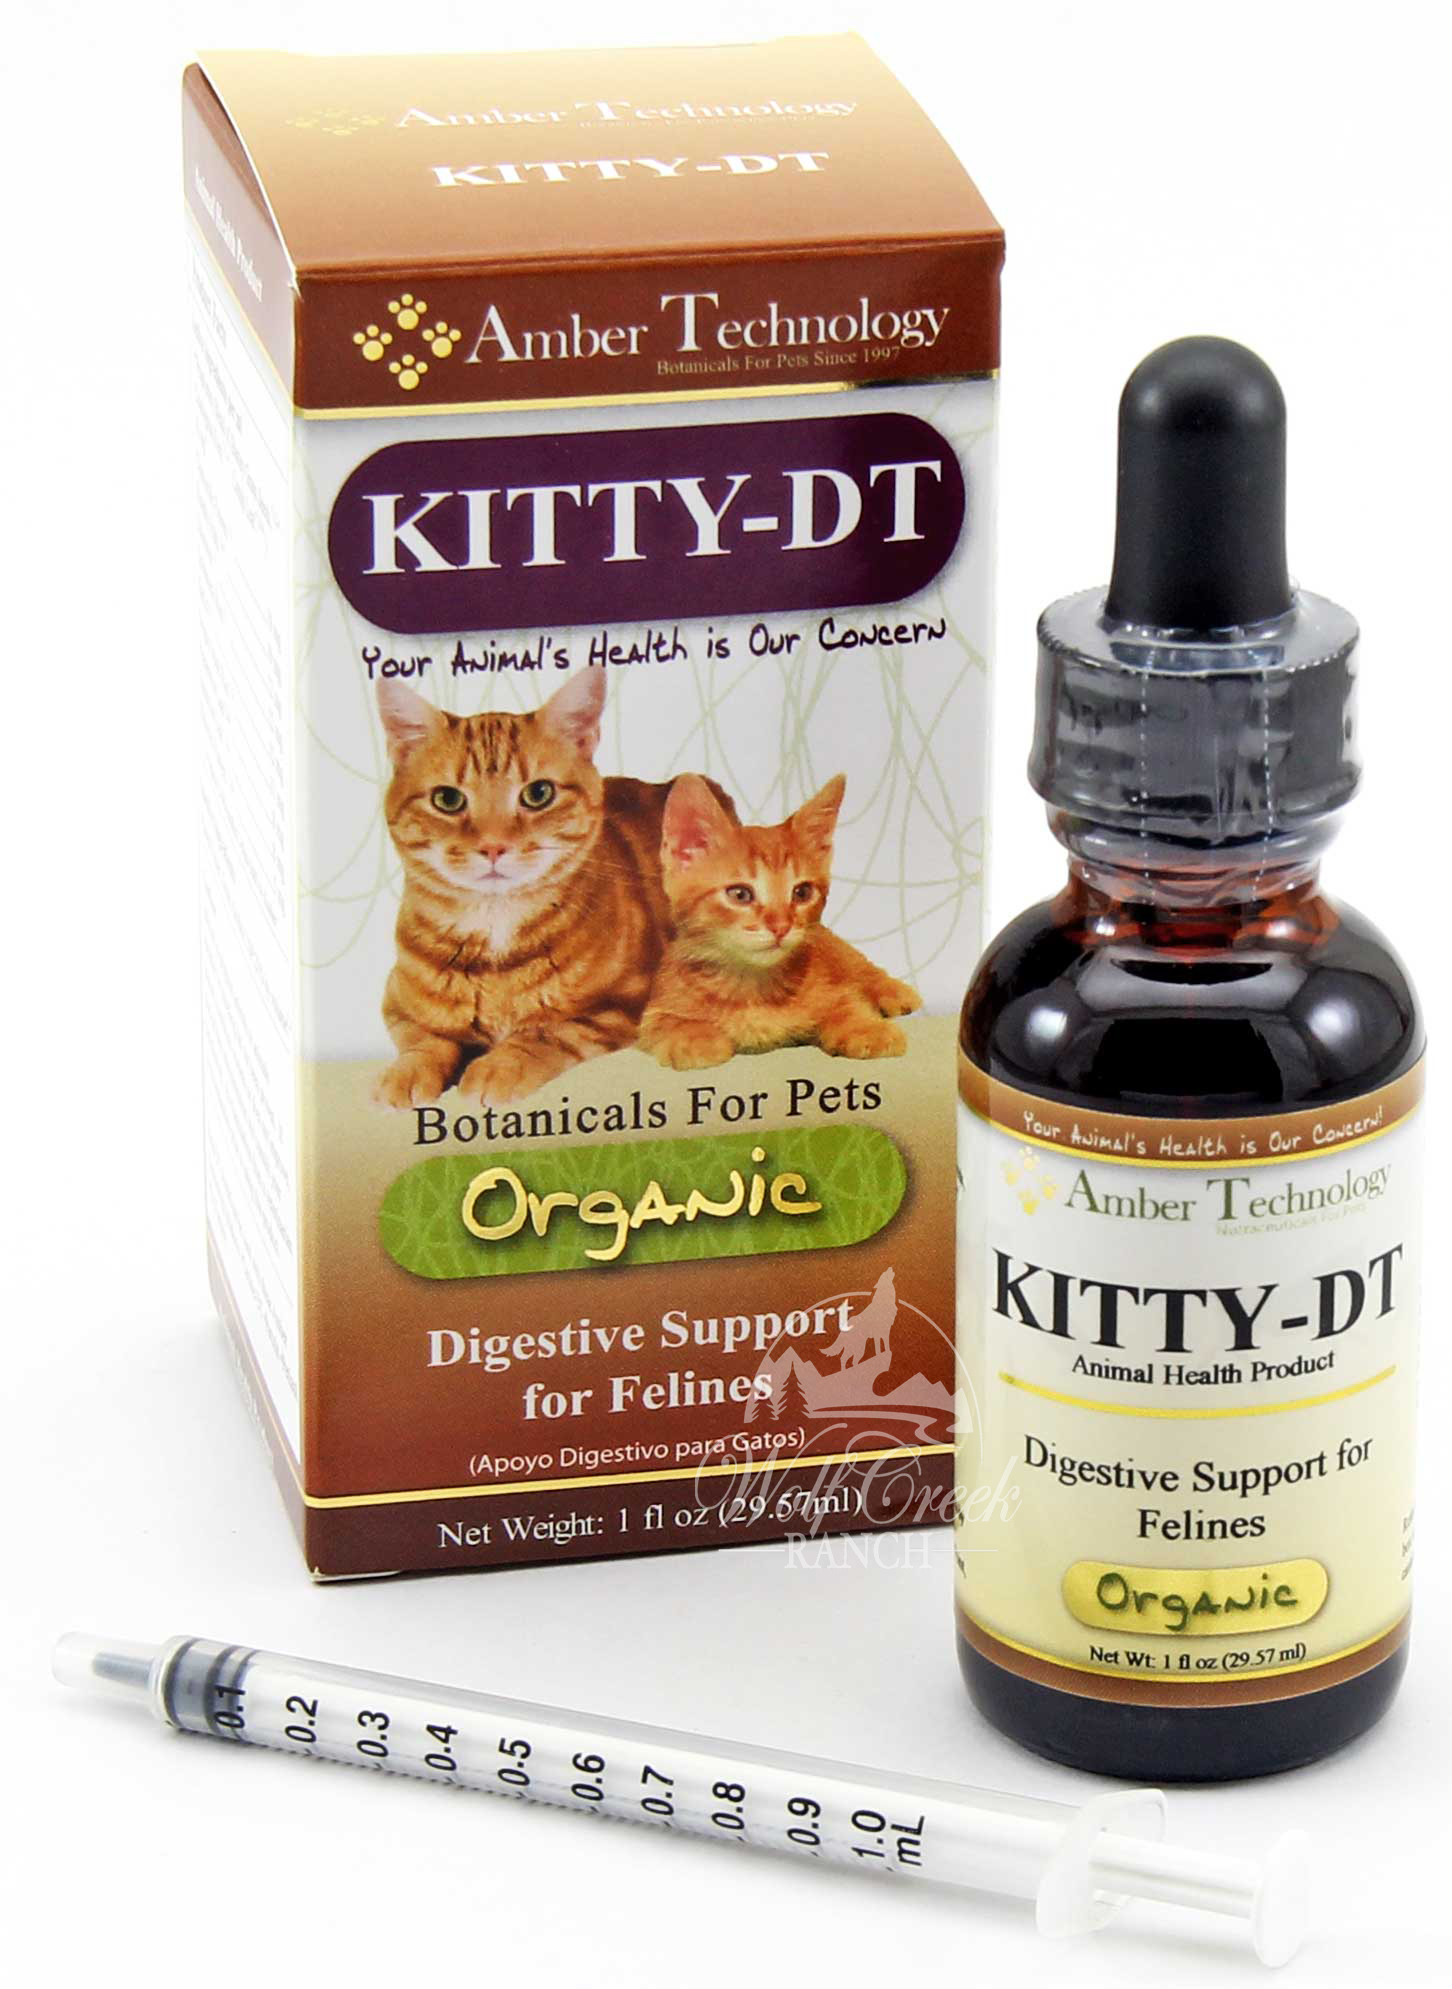 Kitty-DT (aka Kitty Distempaid) & Vibactra Plus help feline distemper kittens get healthy and well again!